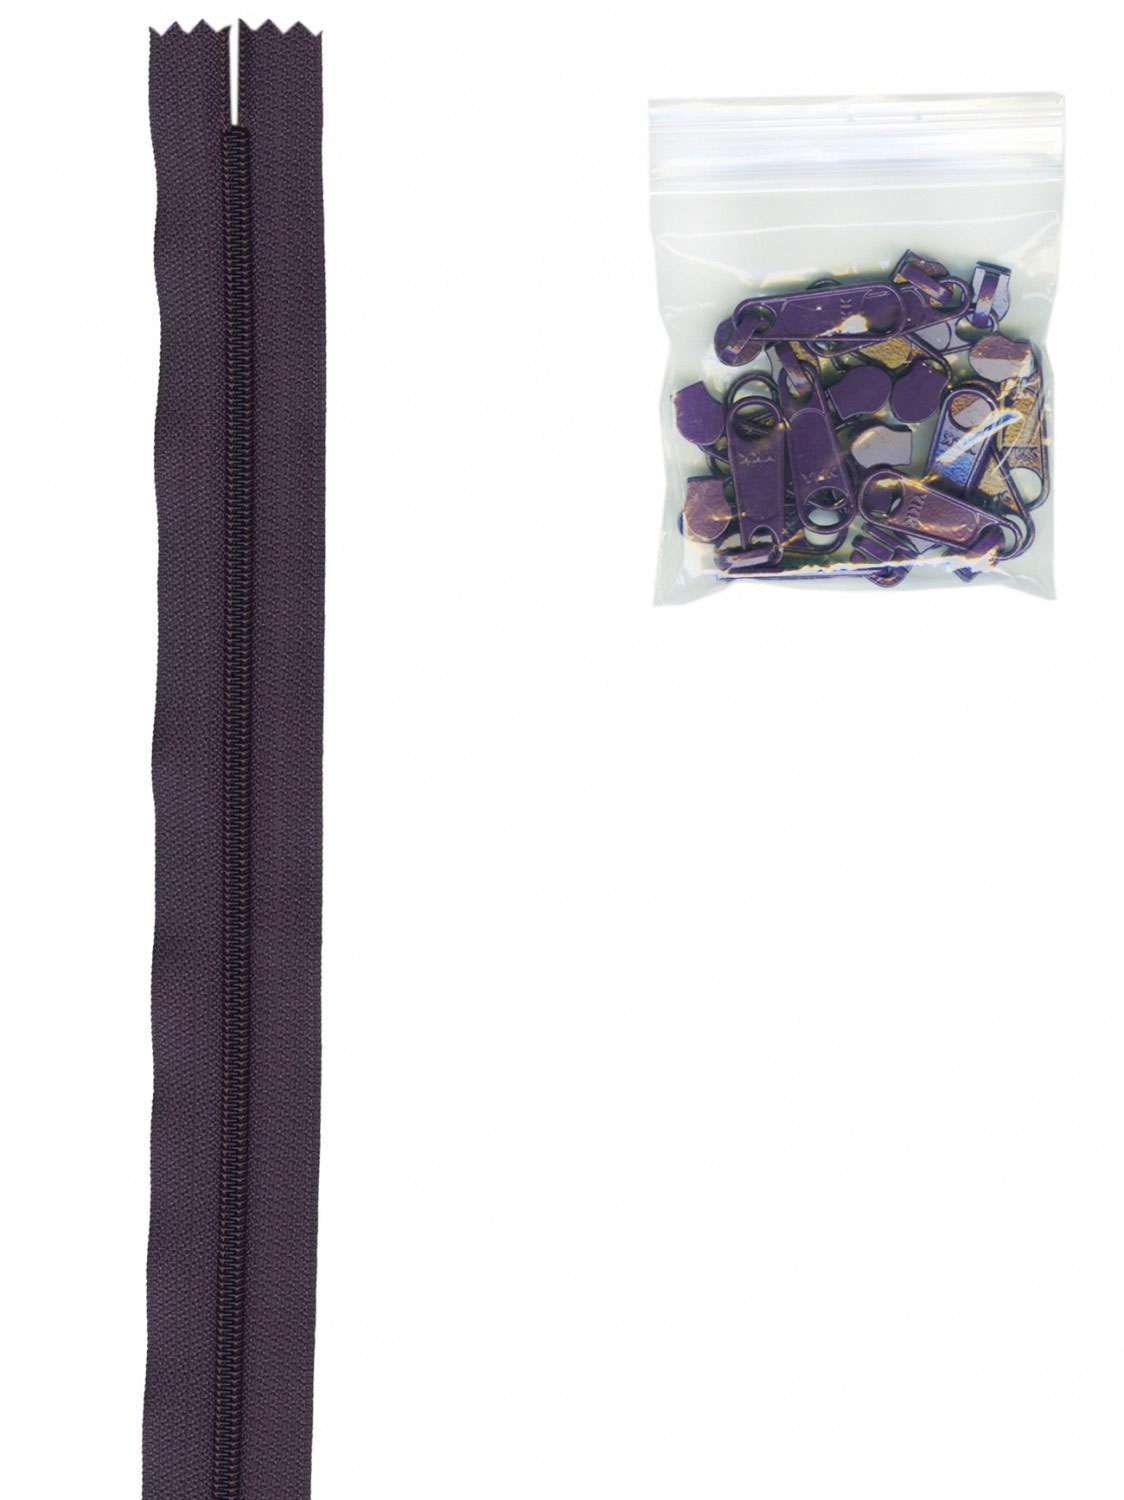 Zippers-and-Pulls-Kit-from-Annie-Unrein-Eggplant